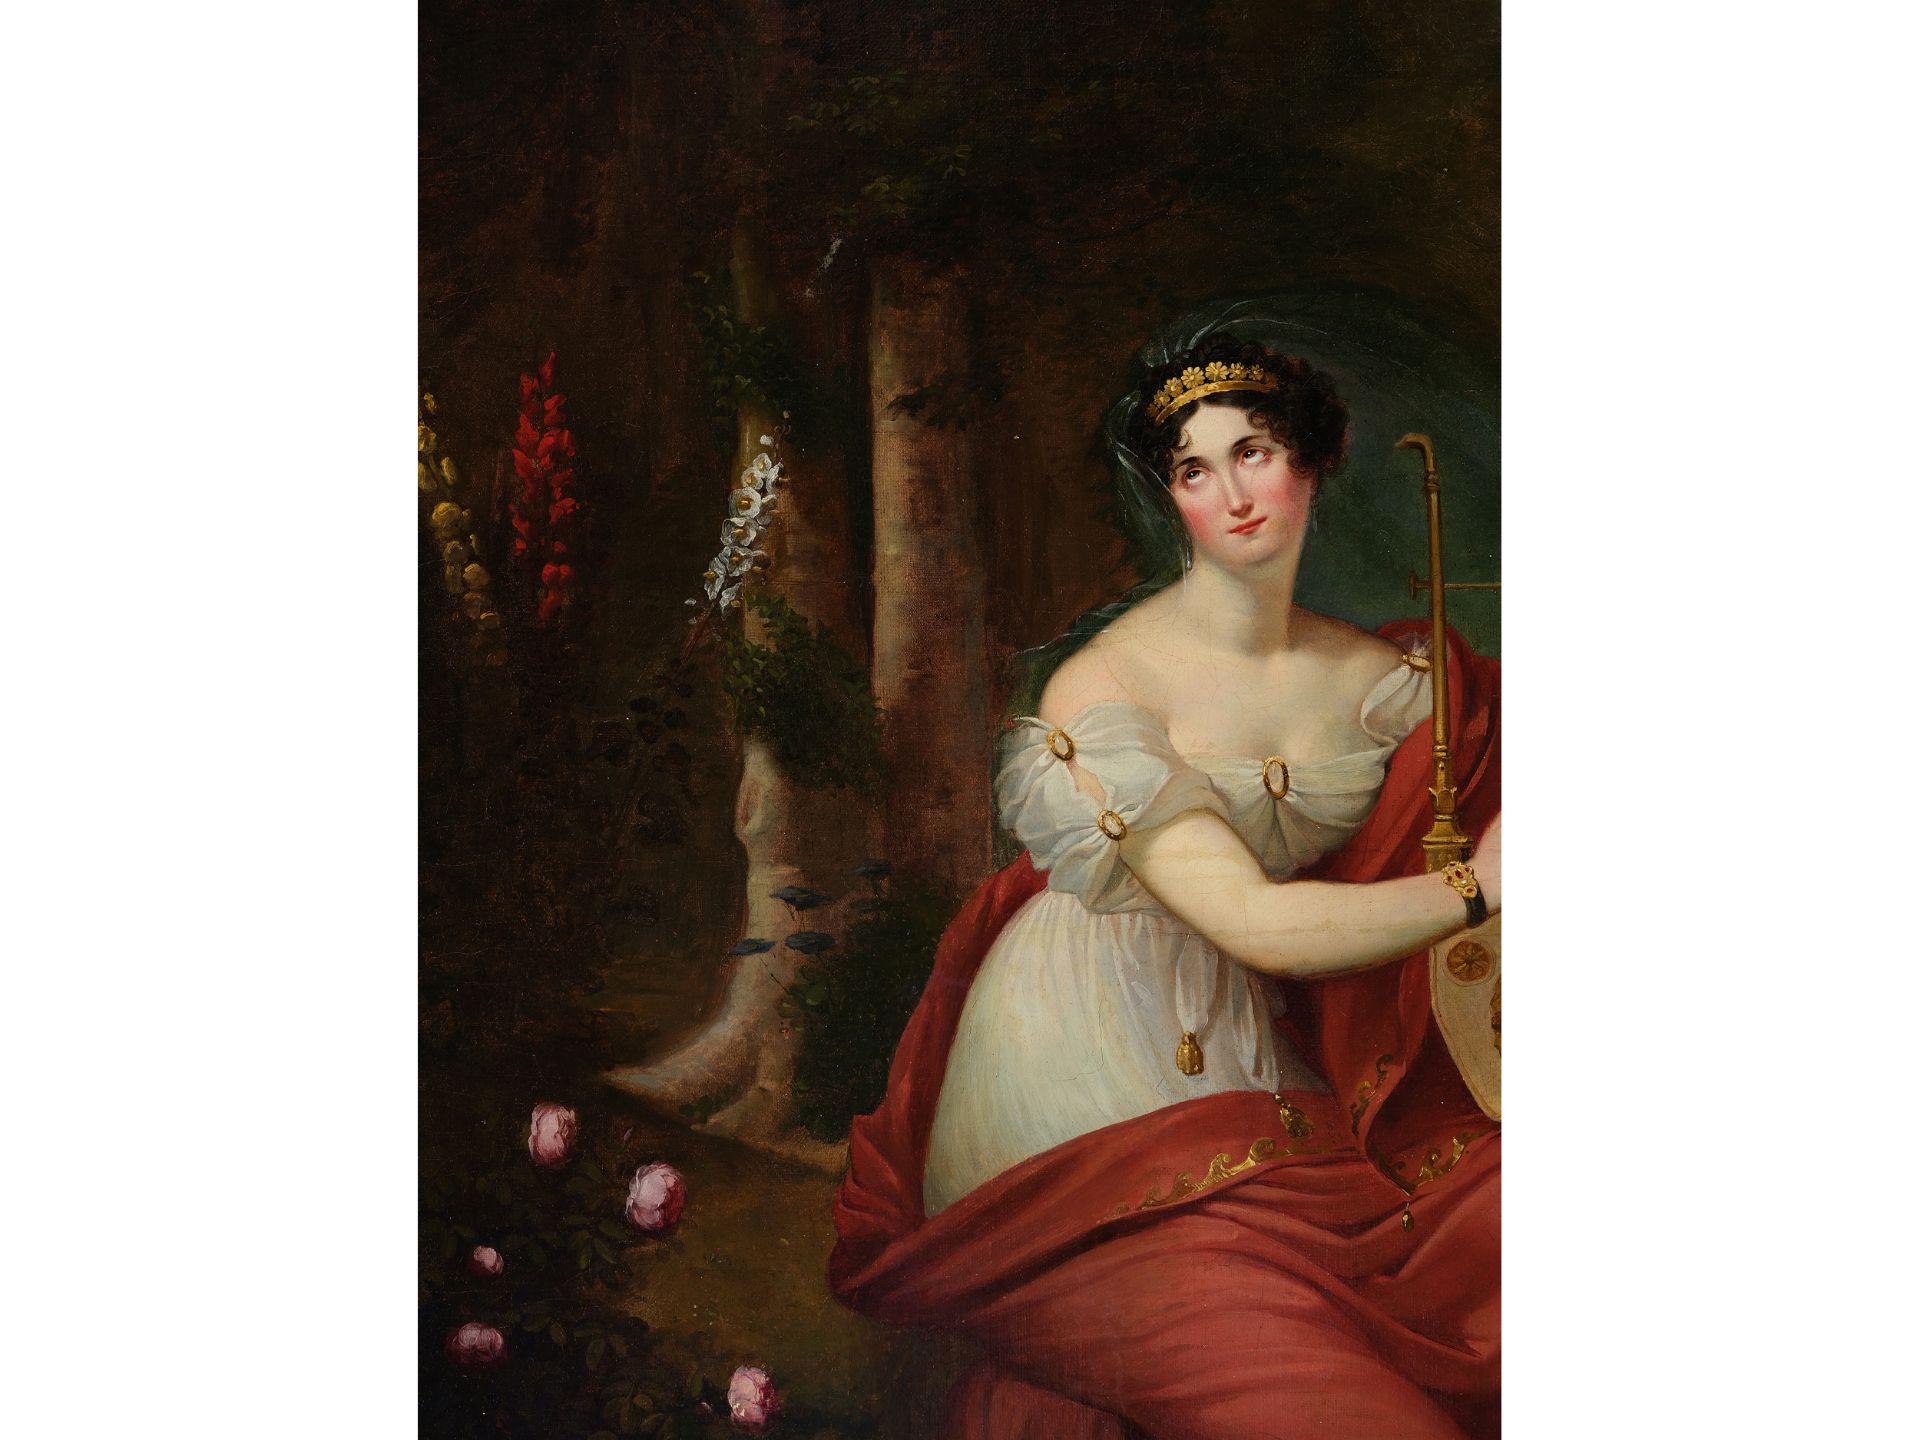 Classicist artist, Lady with lyre, Around 1800 - Image 6 of 7